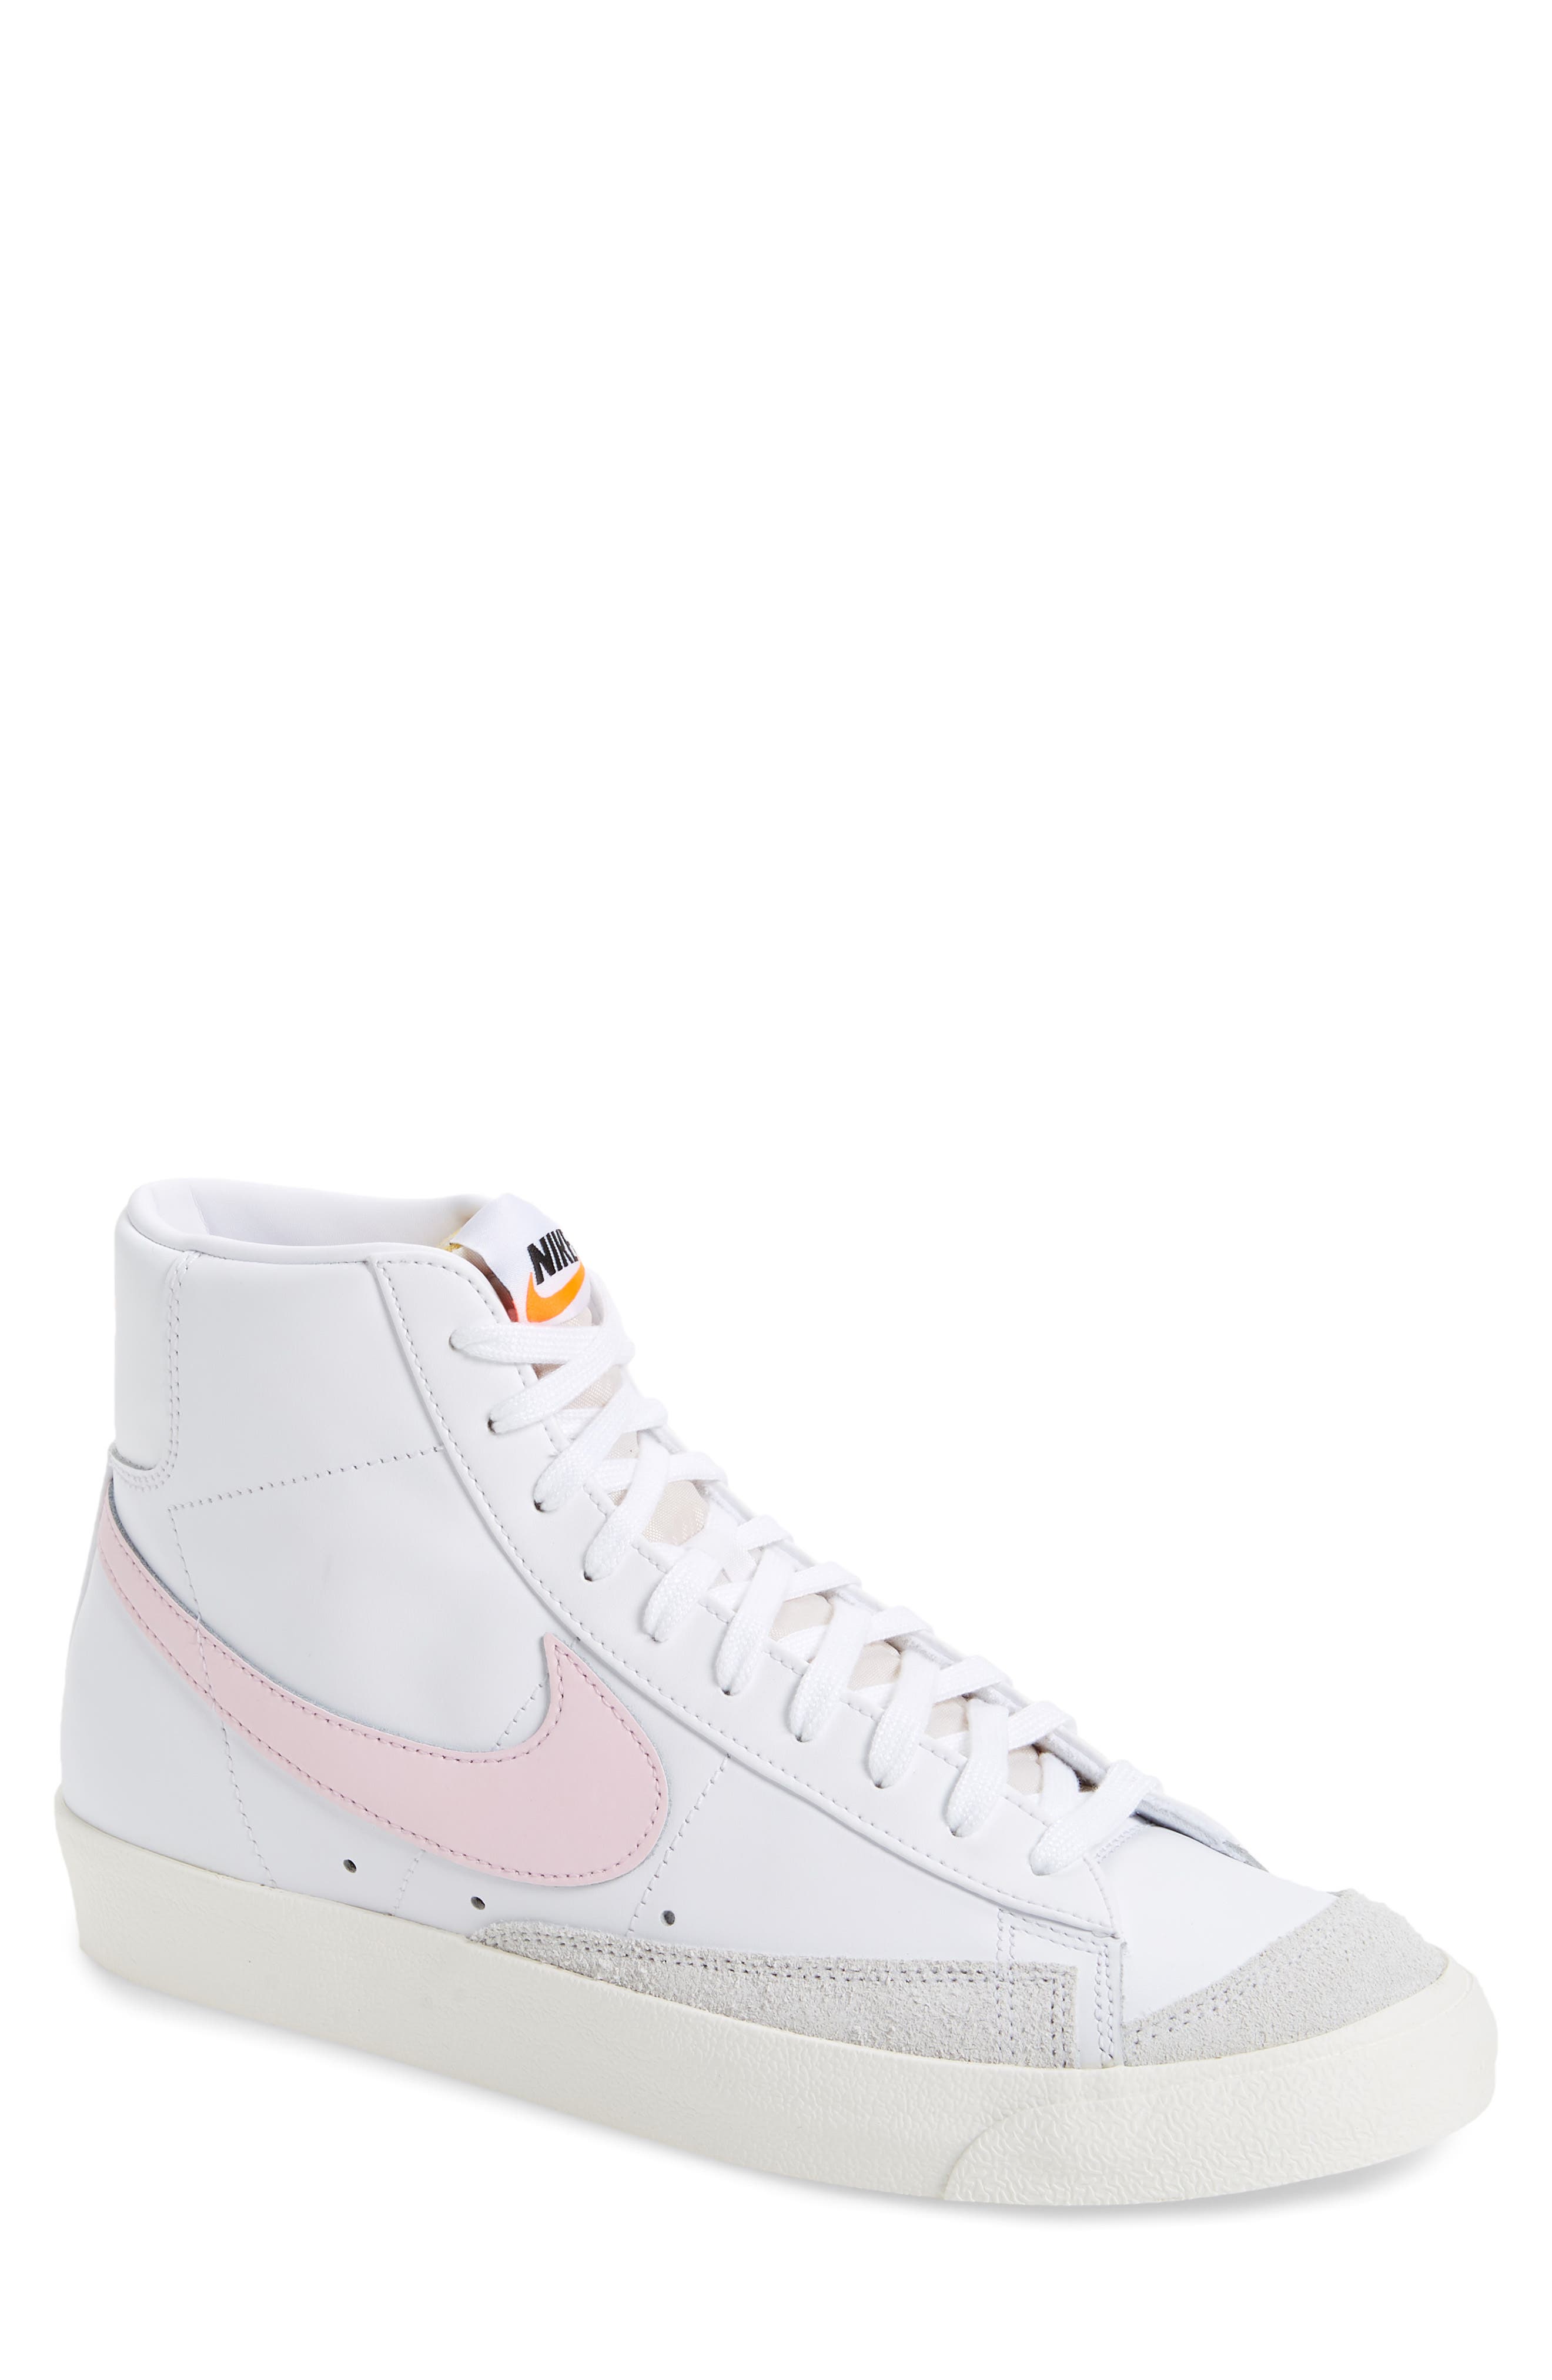 pink and grey nike high tops